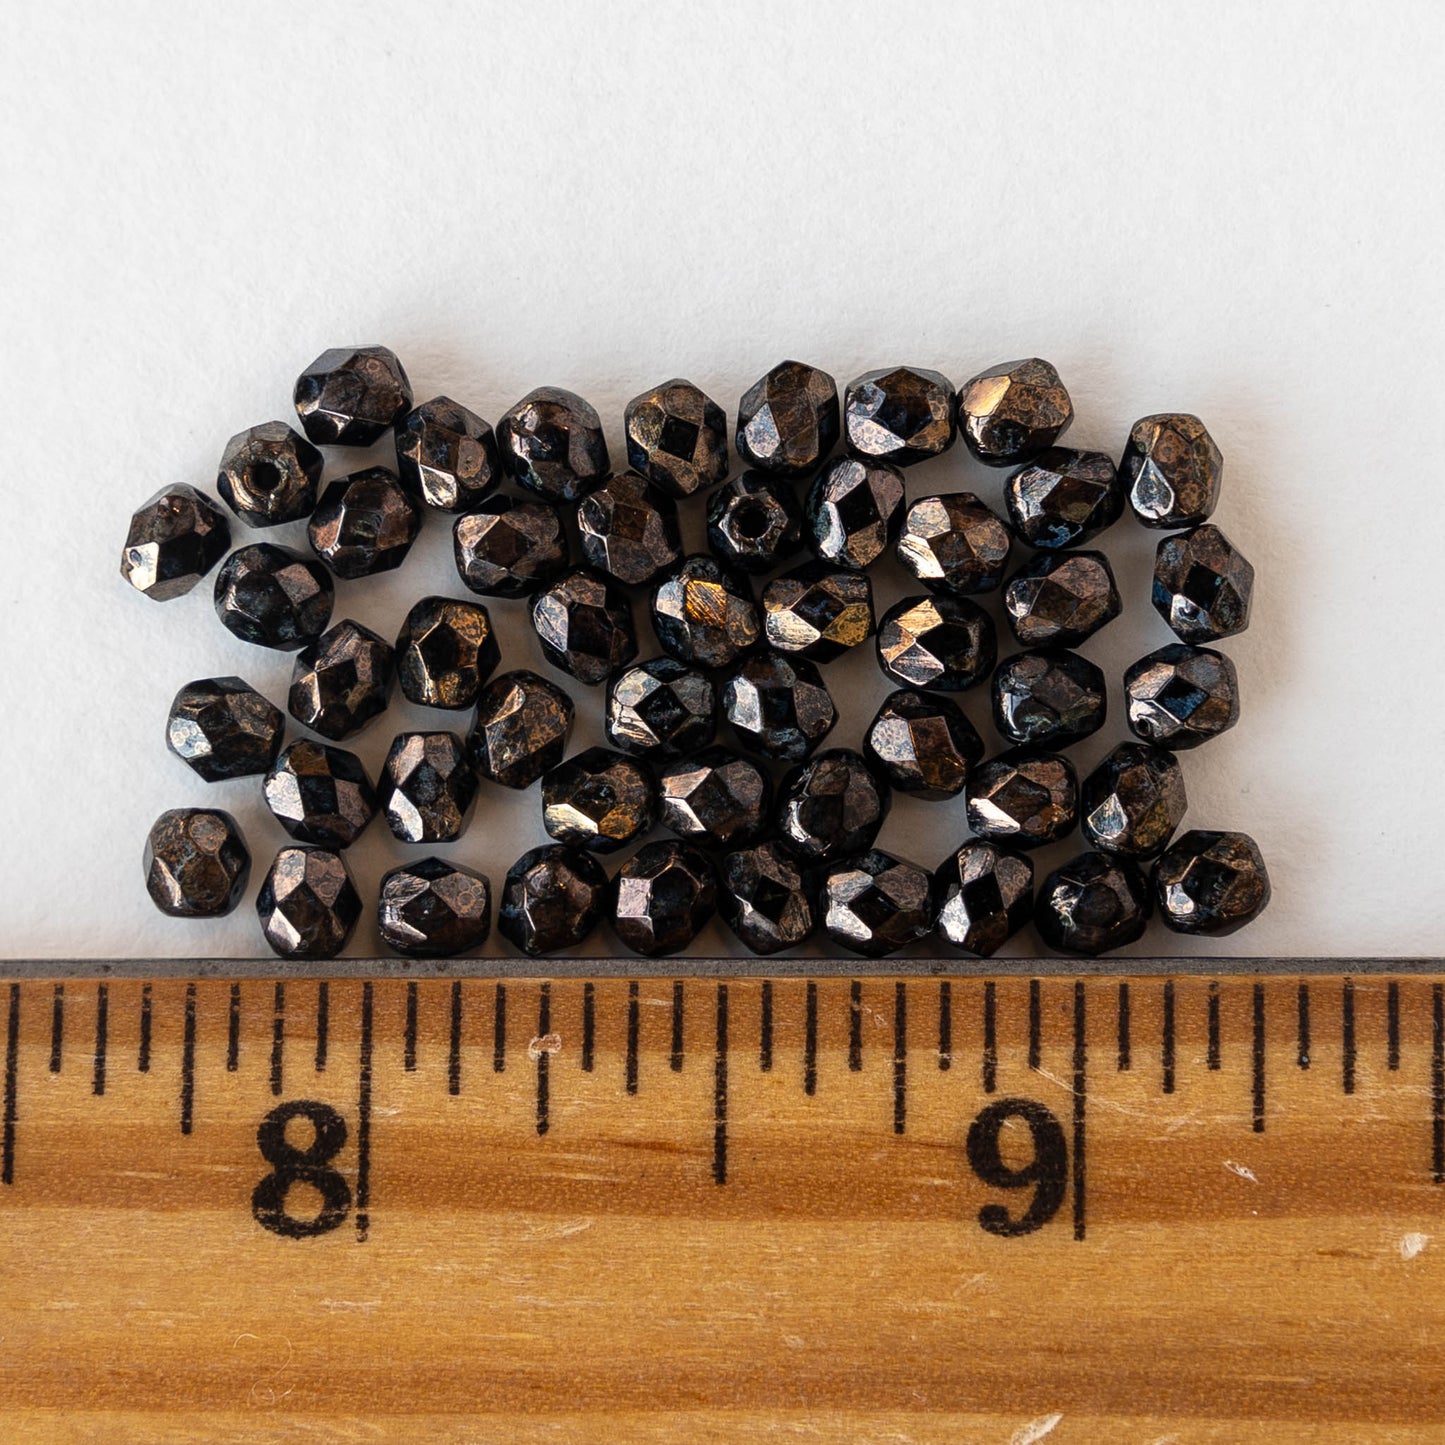 4mm Round Faceted Beads - Black Bronze Picasso - 50